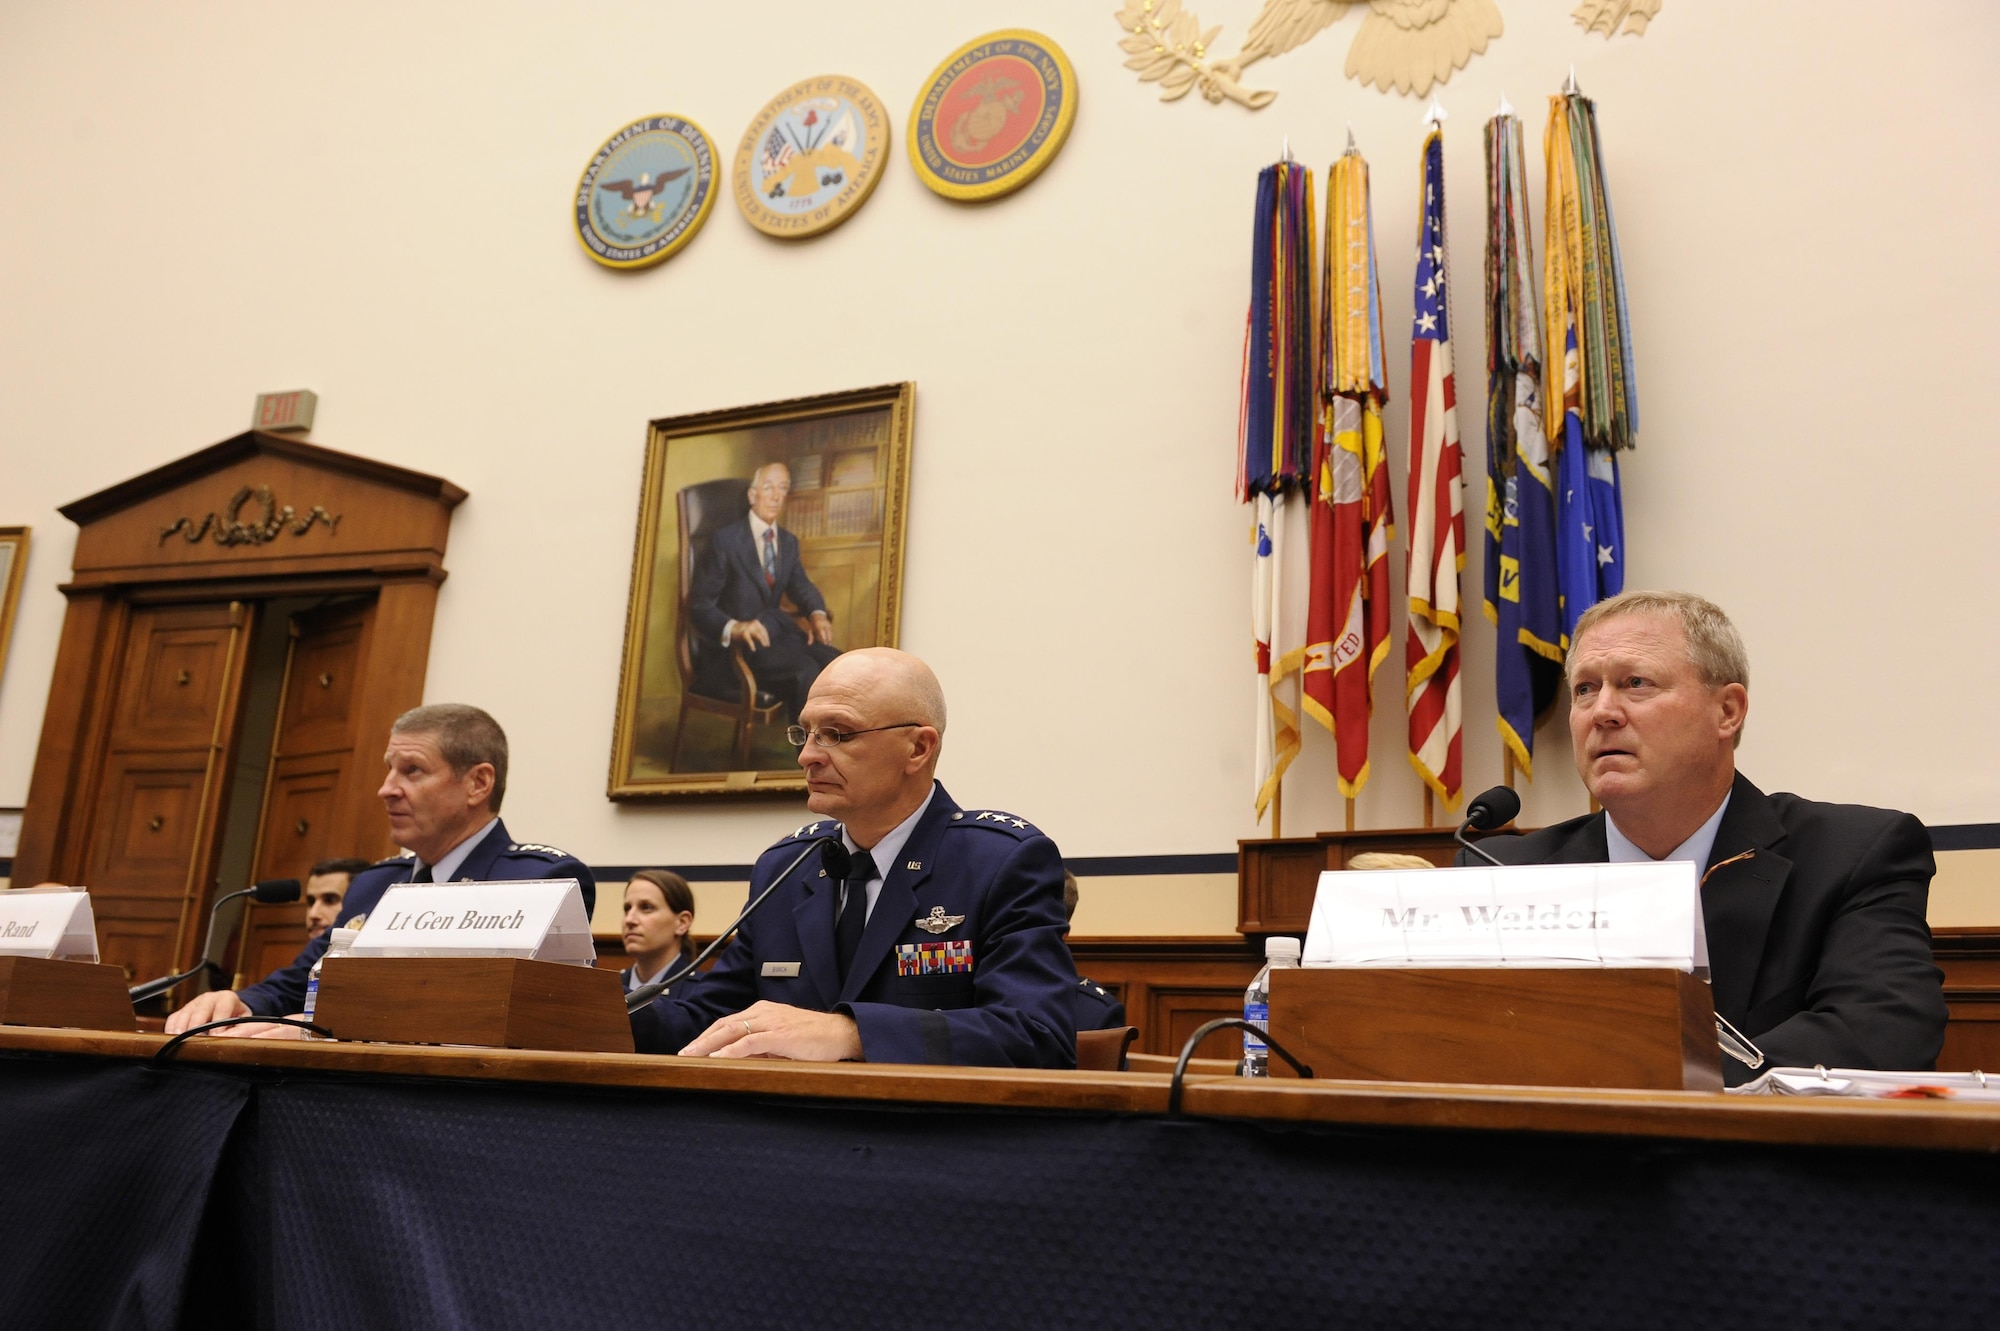 Gen. Robin Rand, the Air Force Global Strike Command commander; Lt. Gen. Arnie Bunch, the military deputy assistant secretary of the Air Force for acquisition; and Randall Walden, the Air Force Rapid Capabilities Office director, testify during a hearing in Washington, D.C., Sept. 29, 2015. They are experts in Air Force long range strike capabilities. (U.S. Air Force photo/Staff Sgt. Whitney Stanfield)